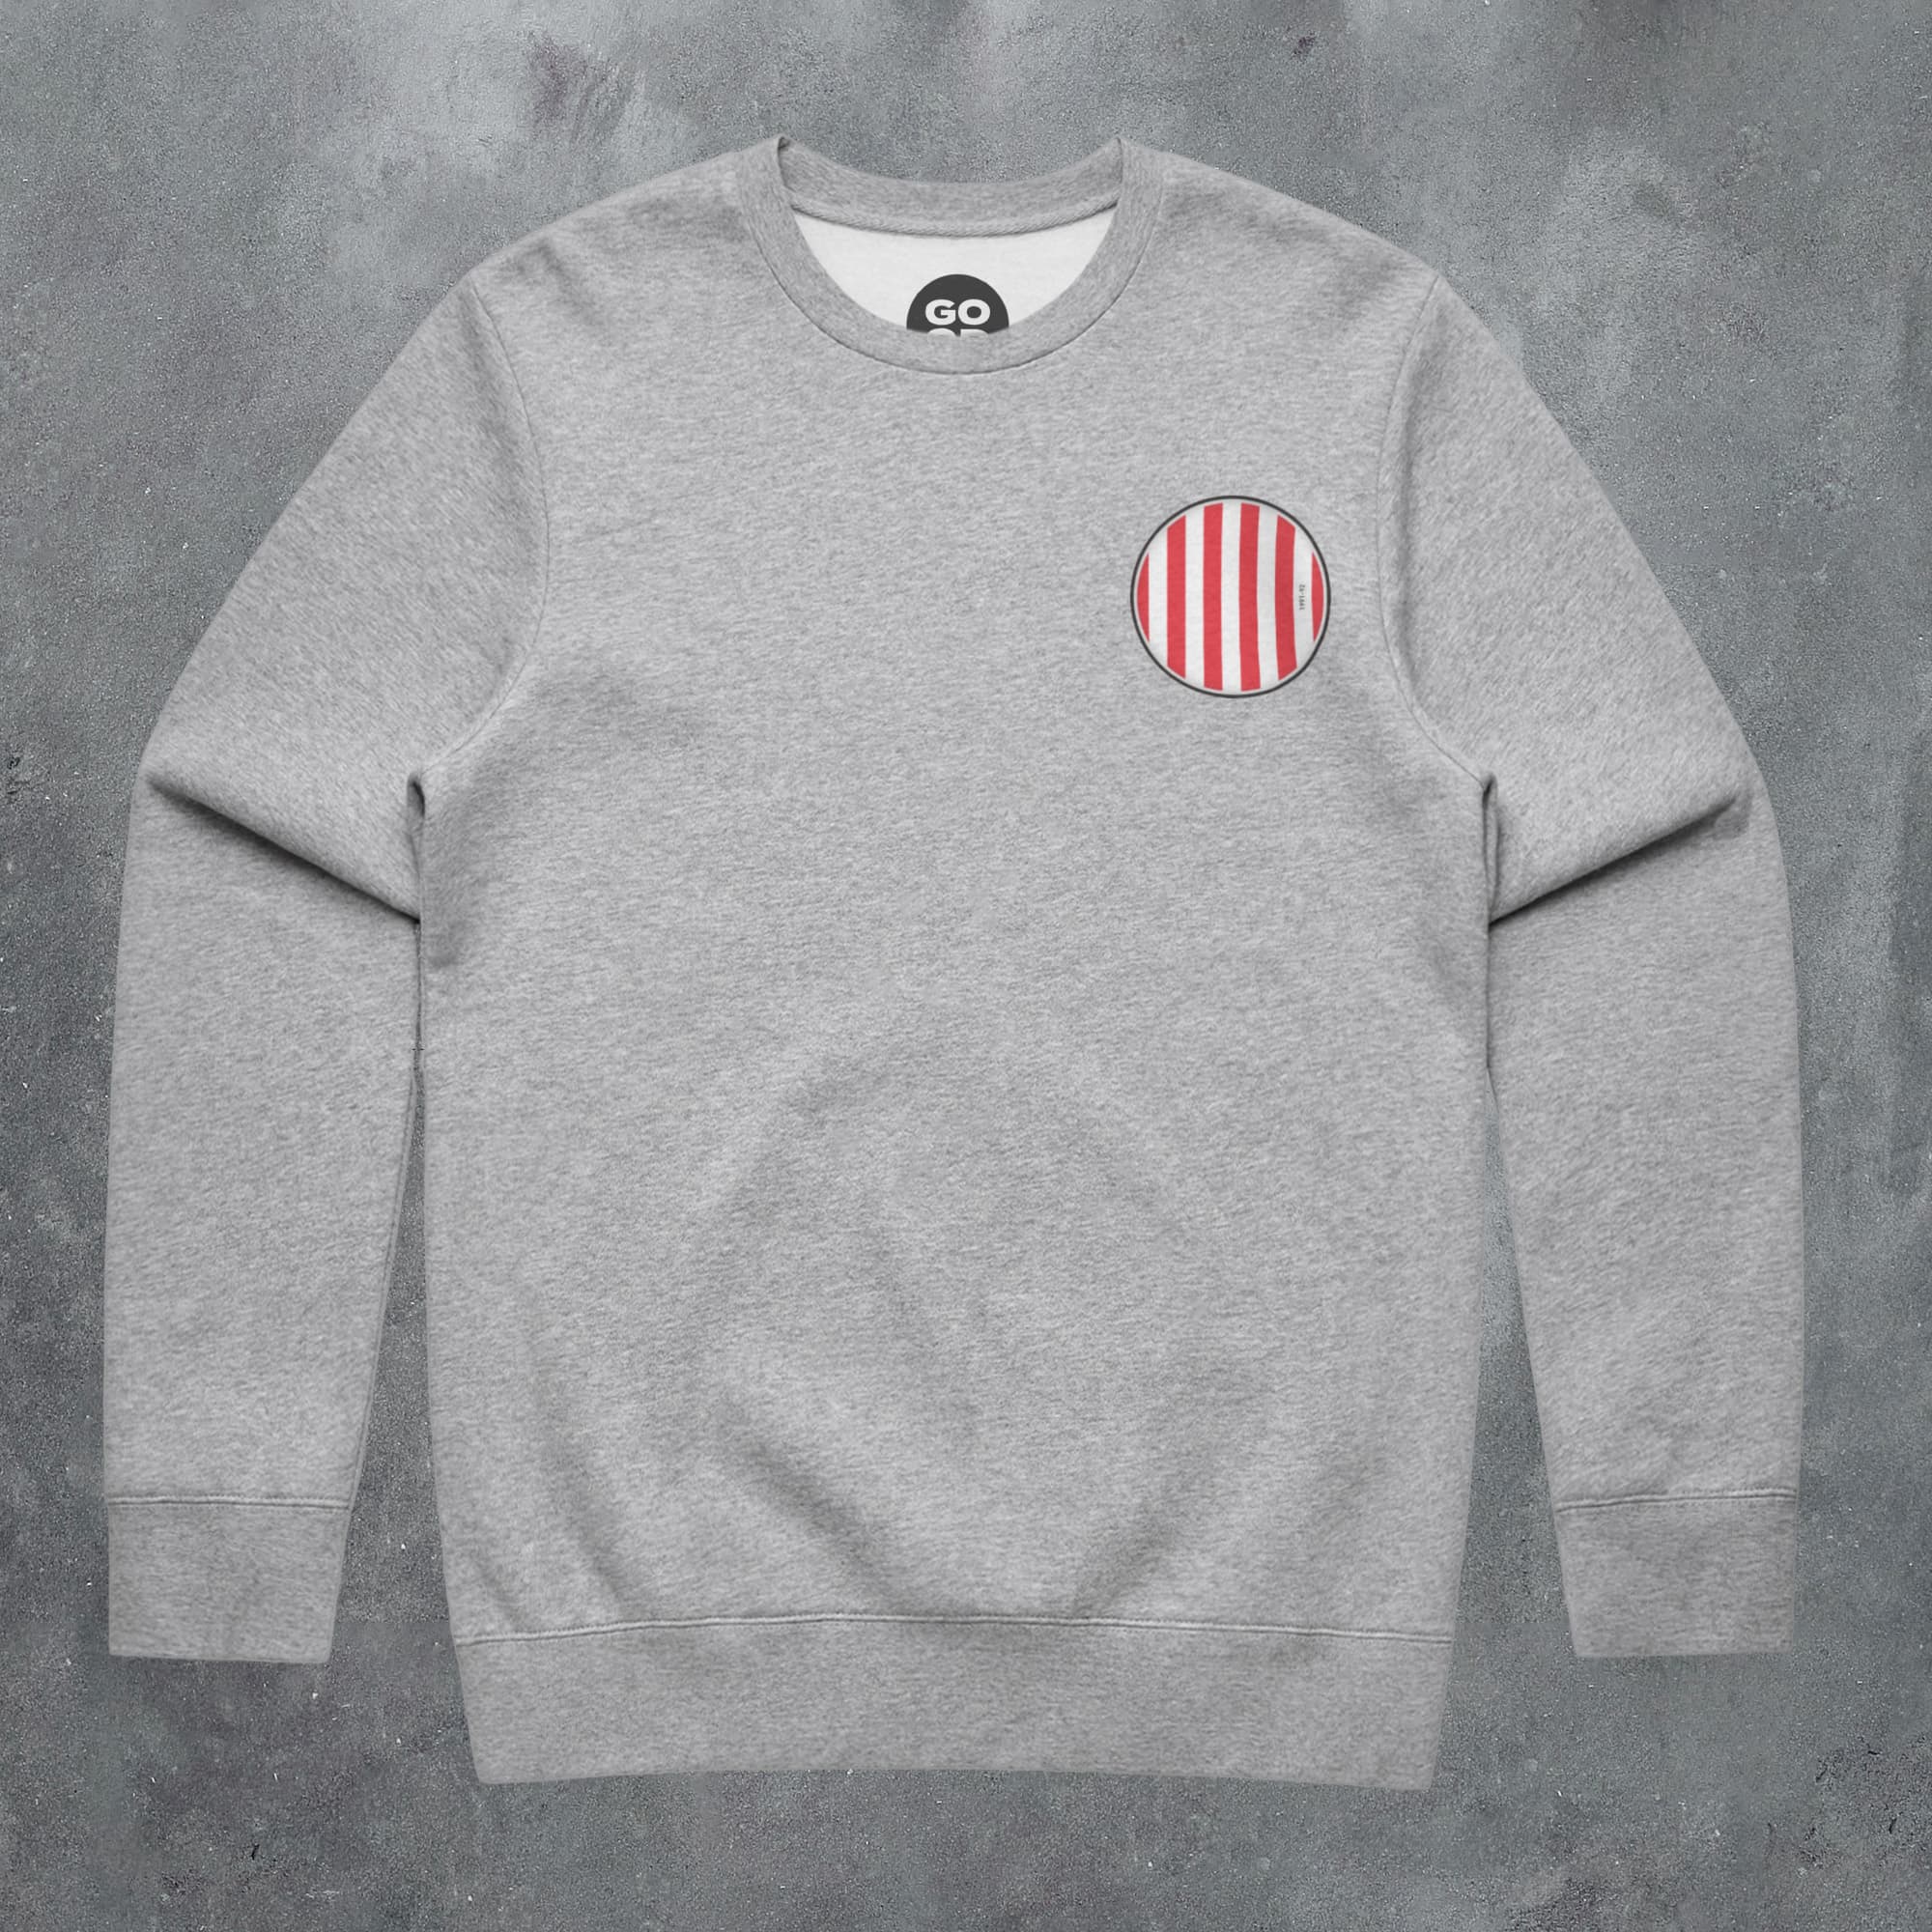 a grey sweatshirt with an american flag patch on it